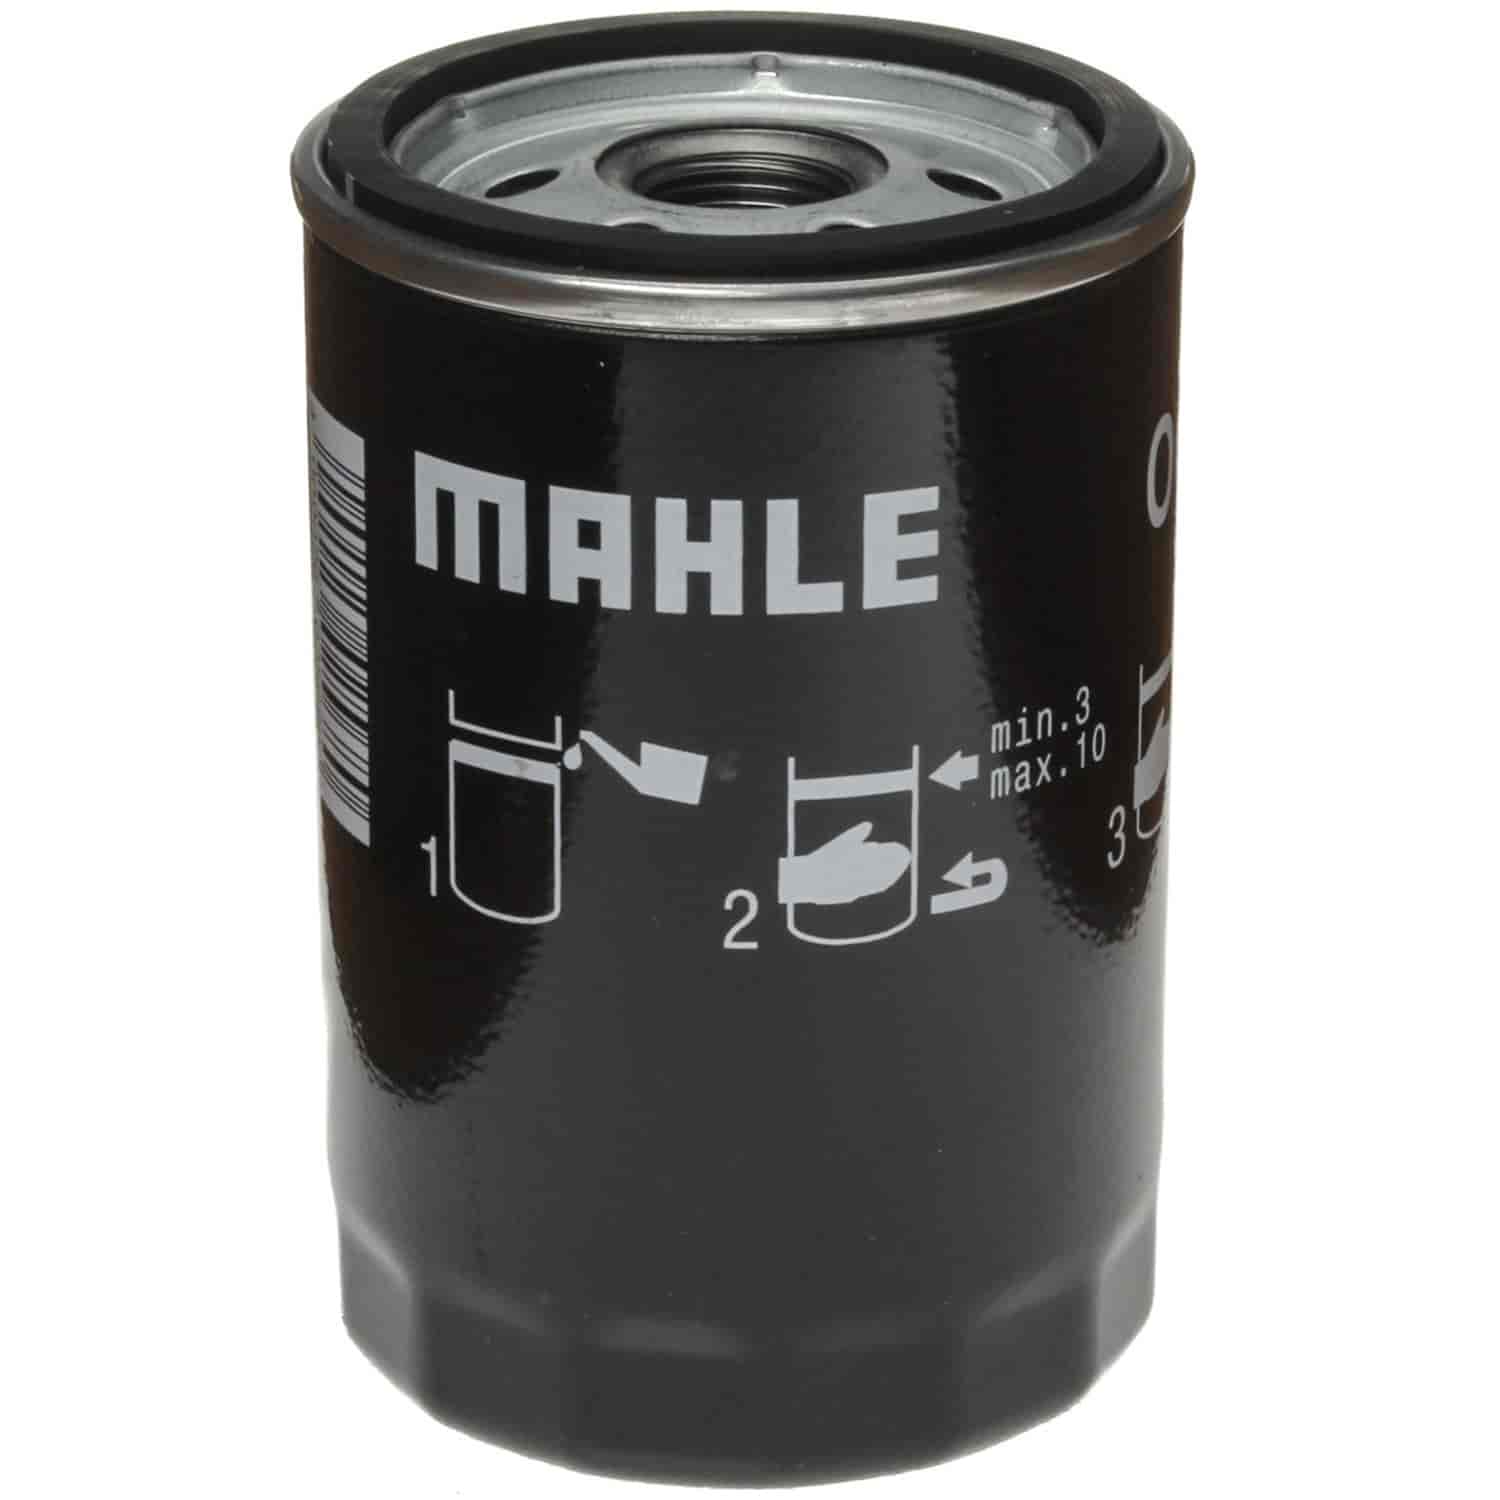 Mahle Oil Filter BMW 3-Series 1979-1990 5-Series 1981-1991 Z1 2.5L 1988-1991